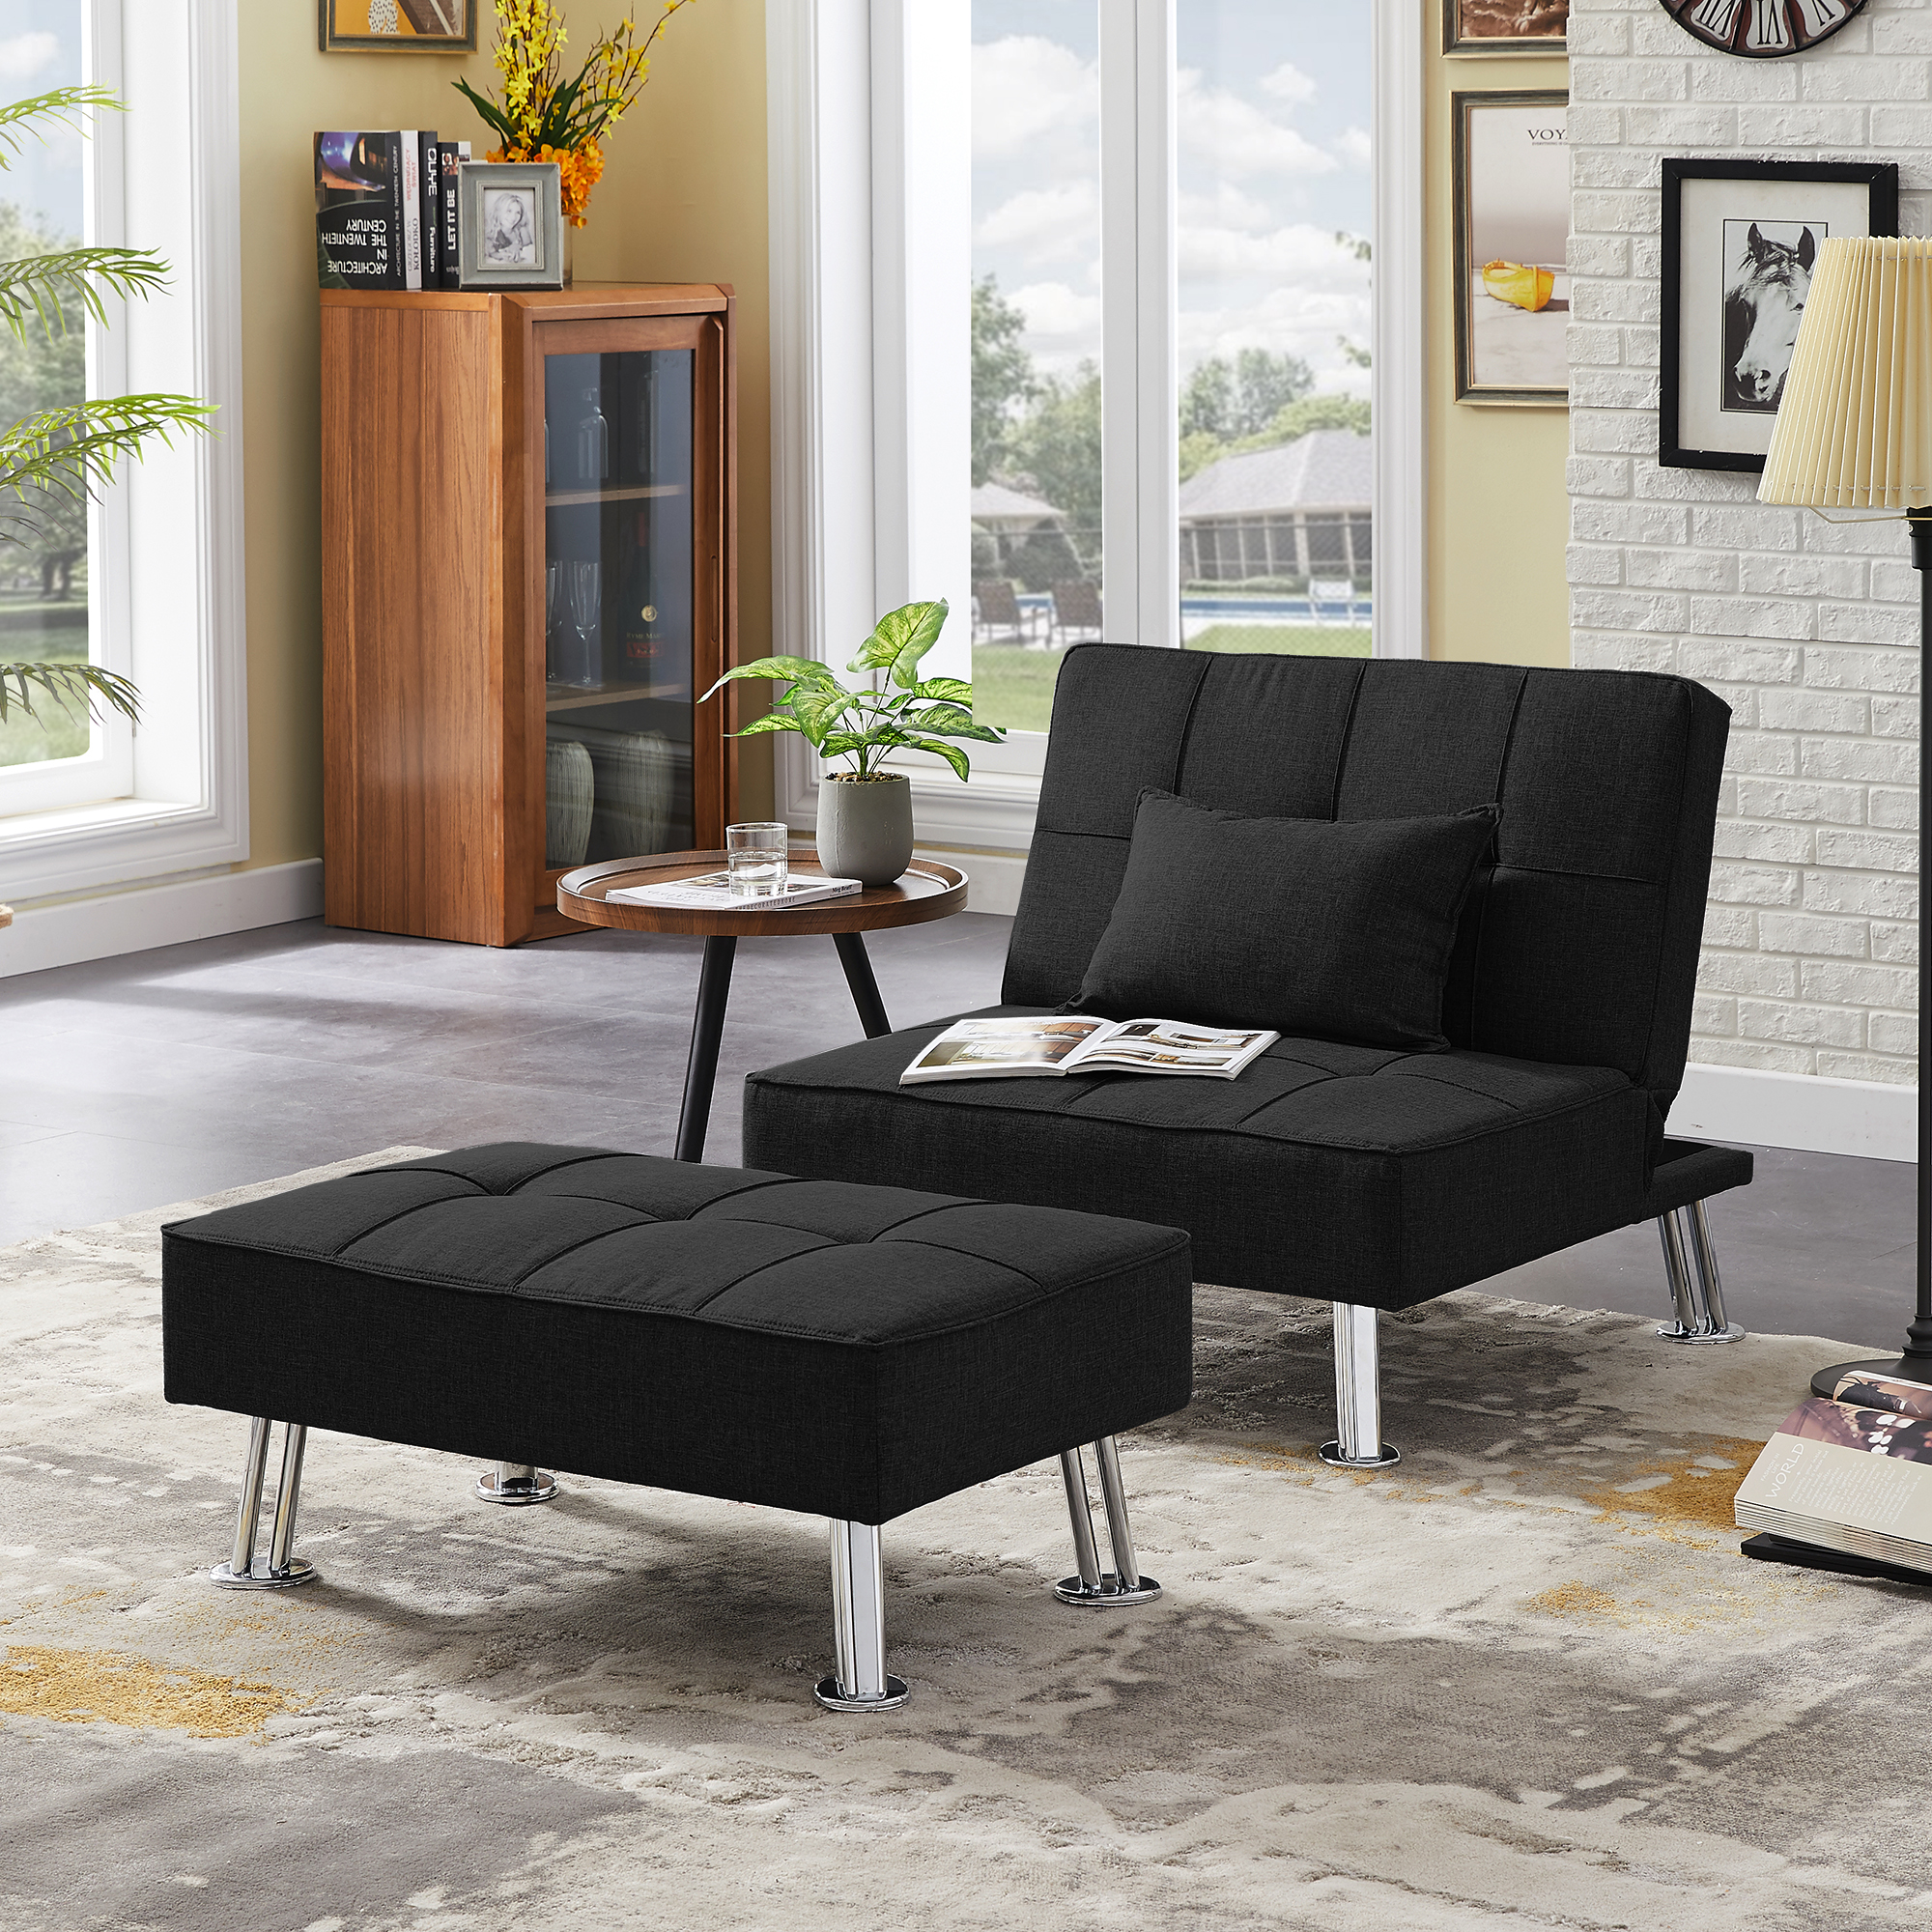 Modern Fabric Single Sofa Bed with Ottoman , Convertible Folding Futon Chair, Lounge Chair Set with Metal Legs .-Boyel Living